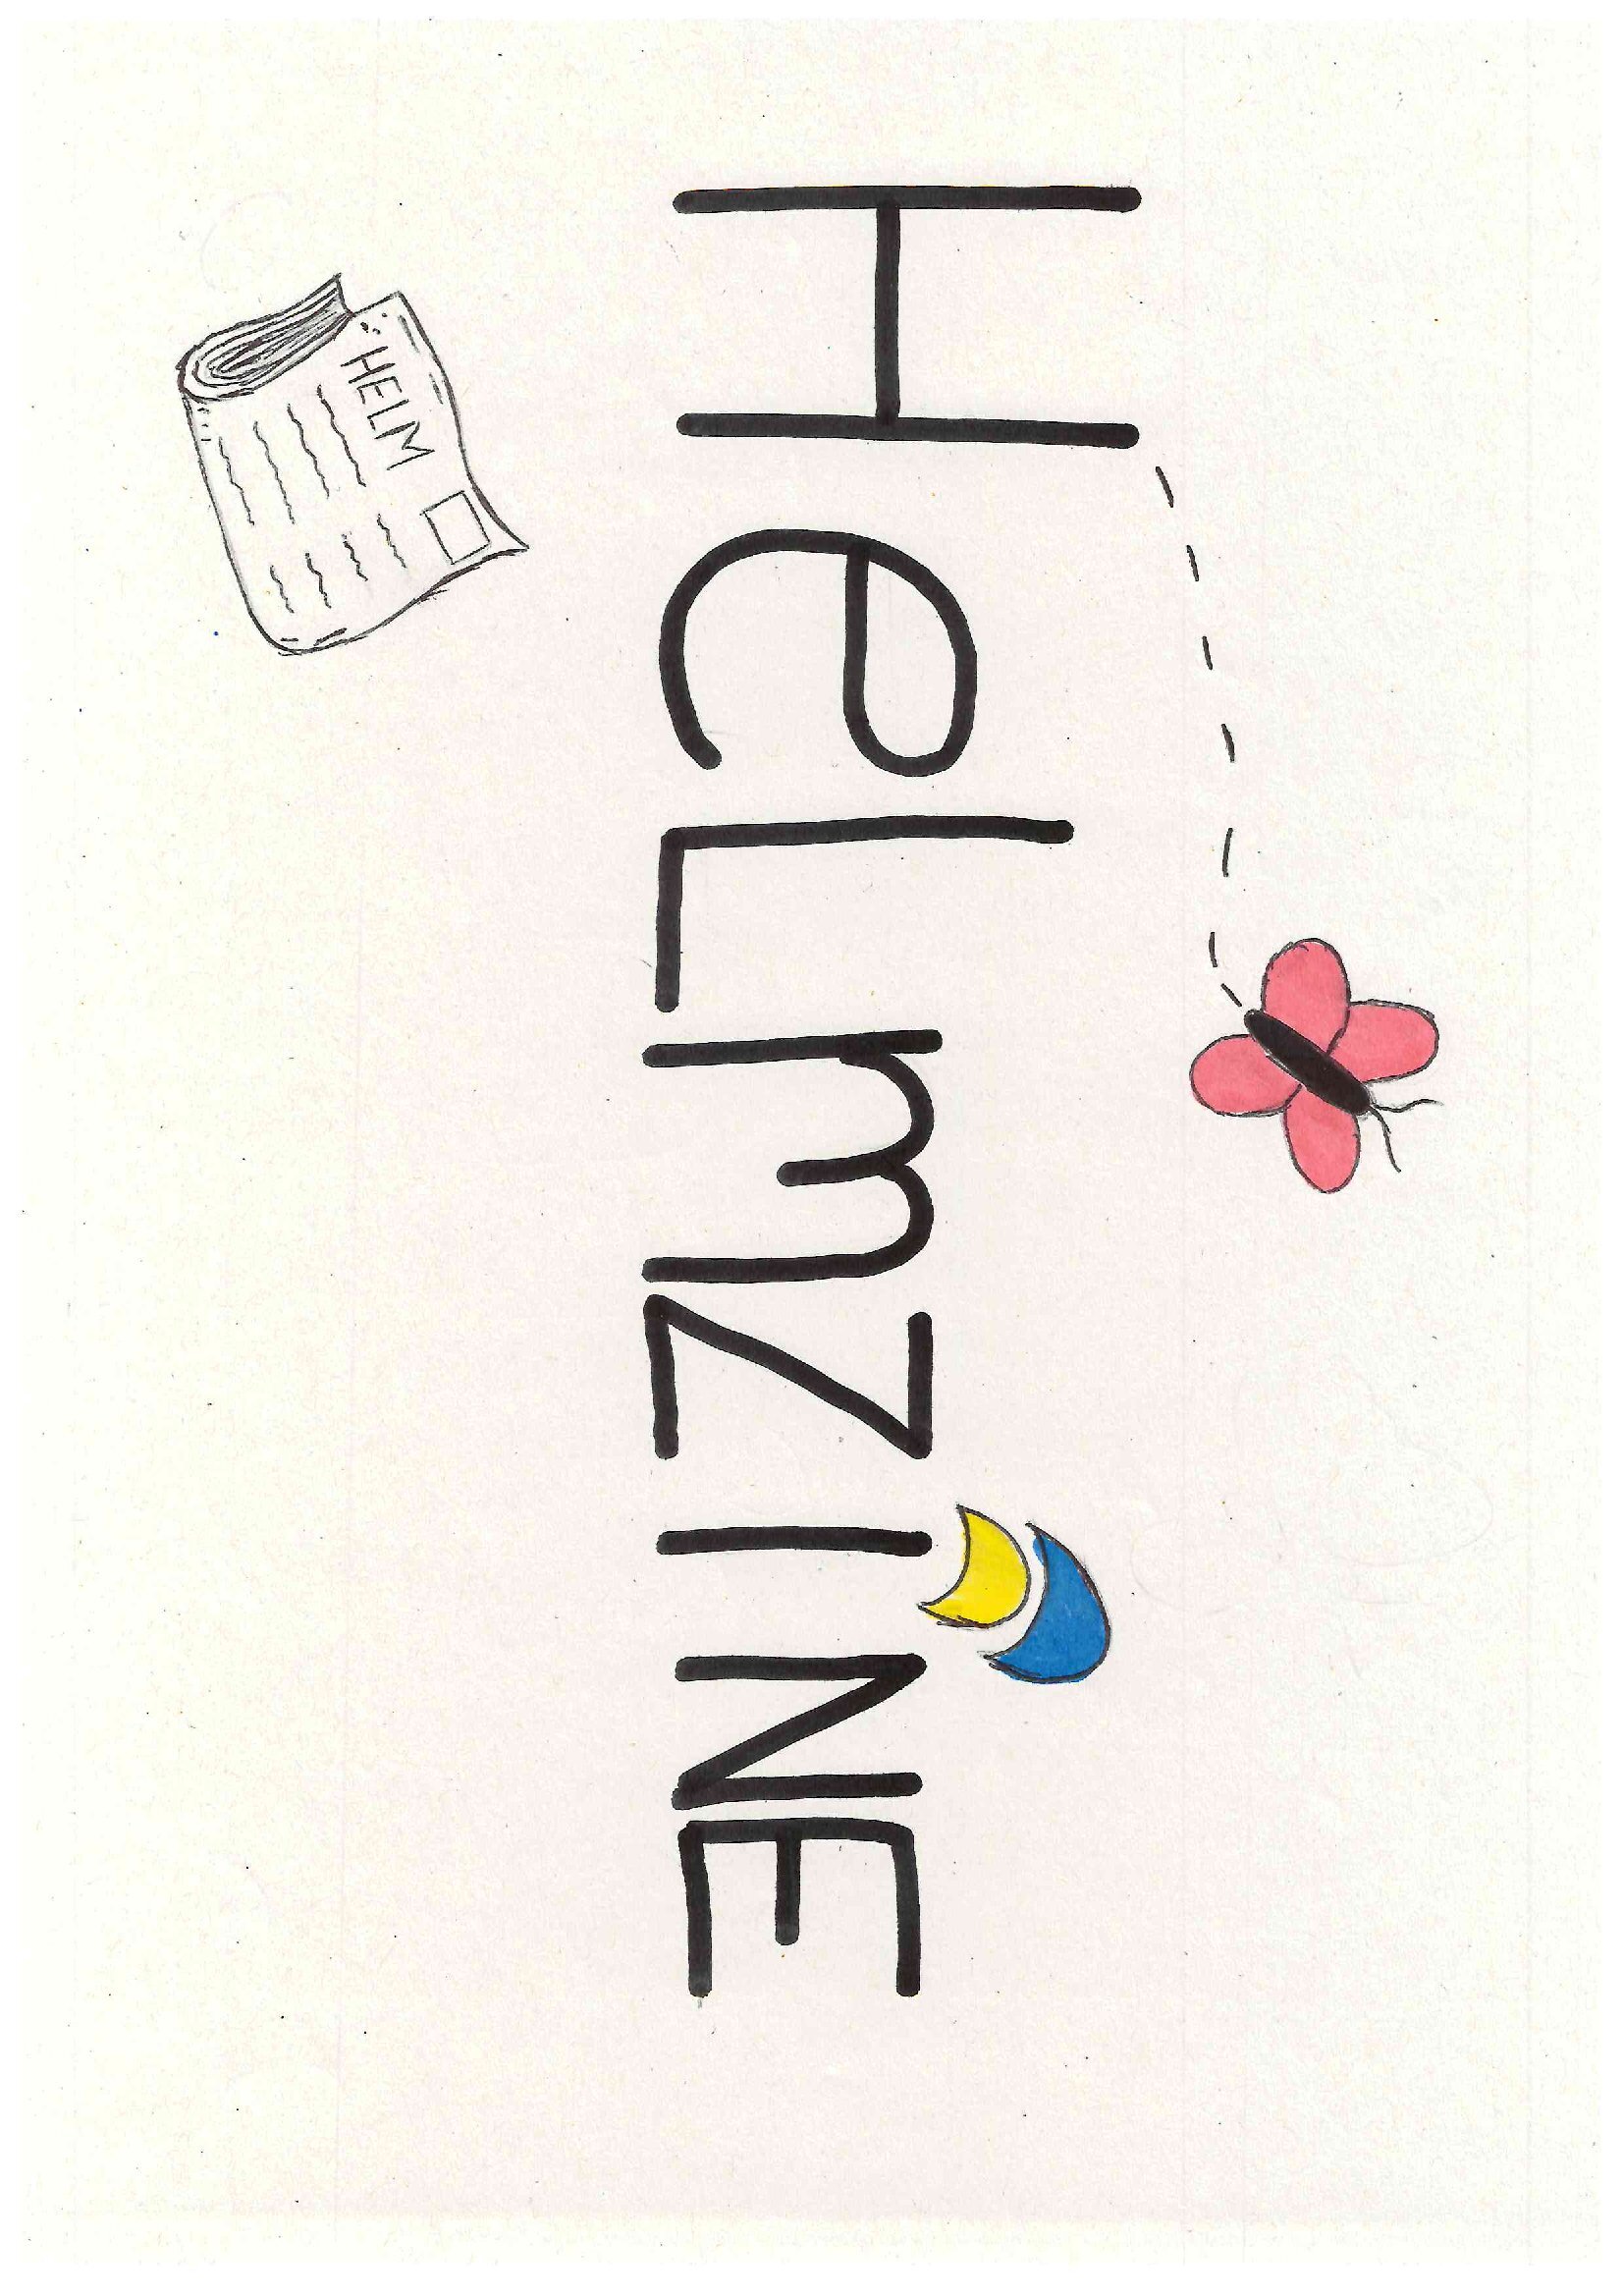 Welcome to the first edition of Helm’s HelmZINE!